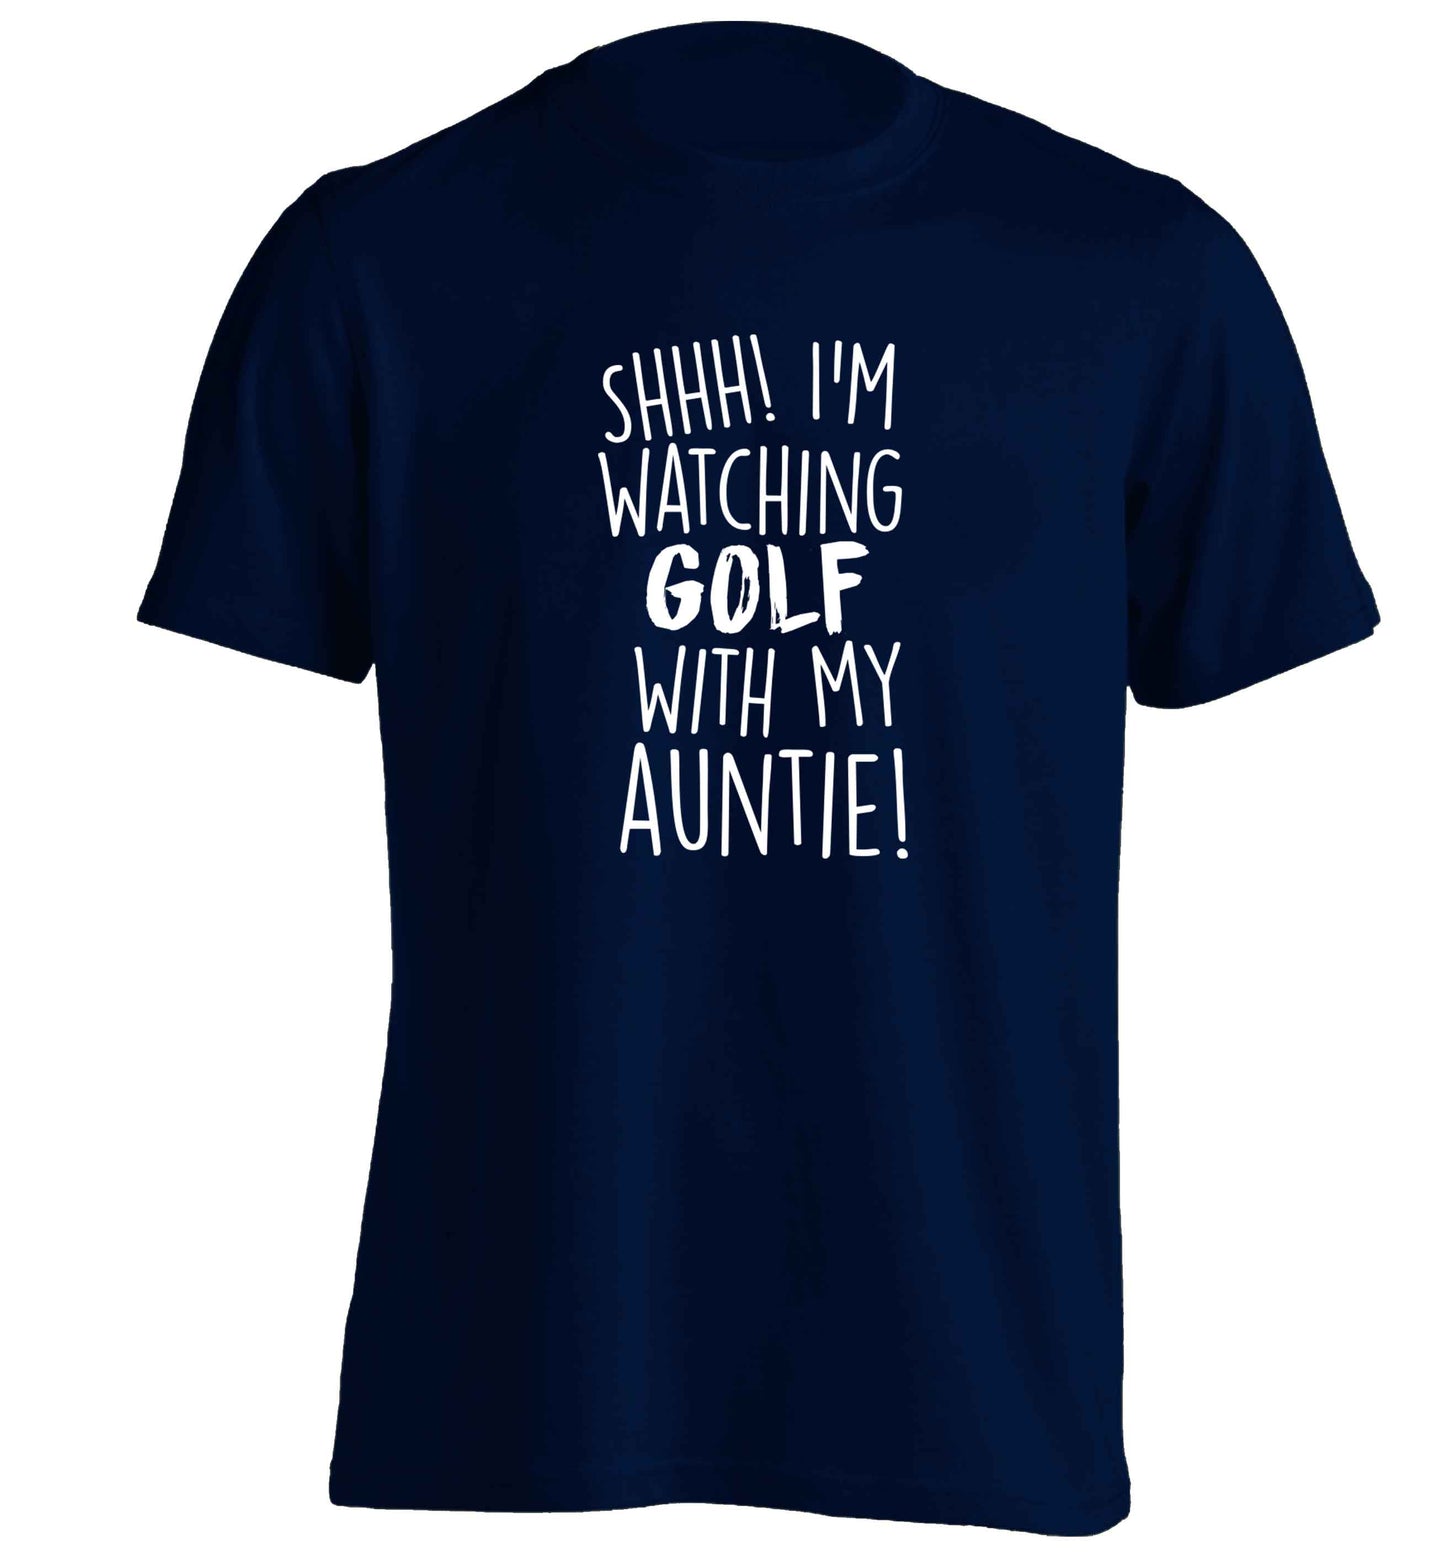 Shh I'm watching golf with my auntie adults unisex navy Tshirt 2XL